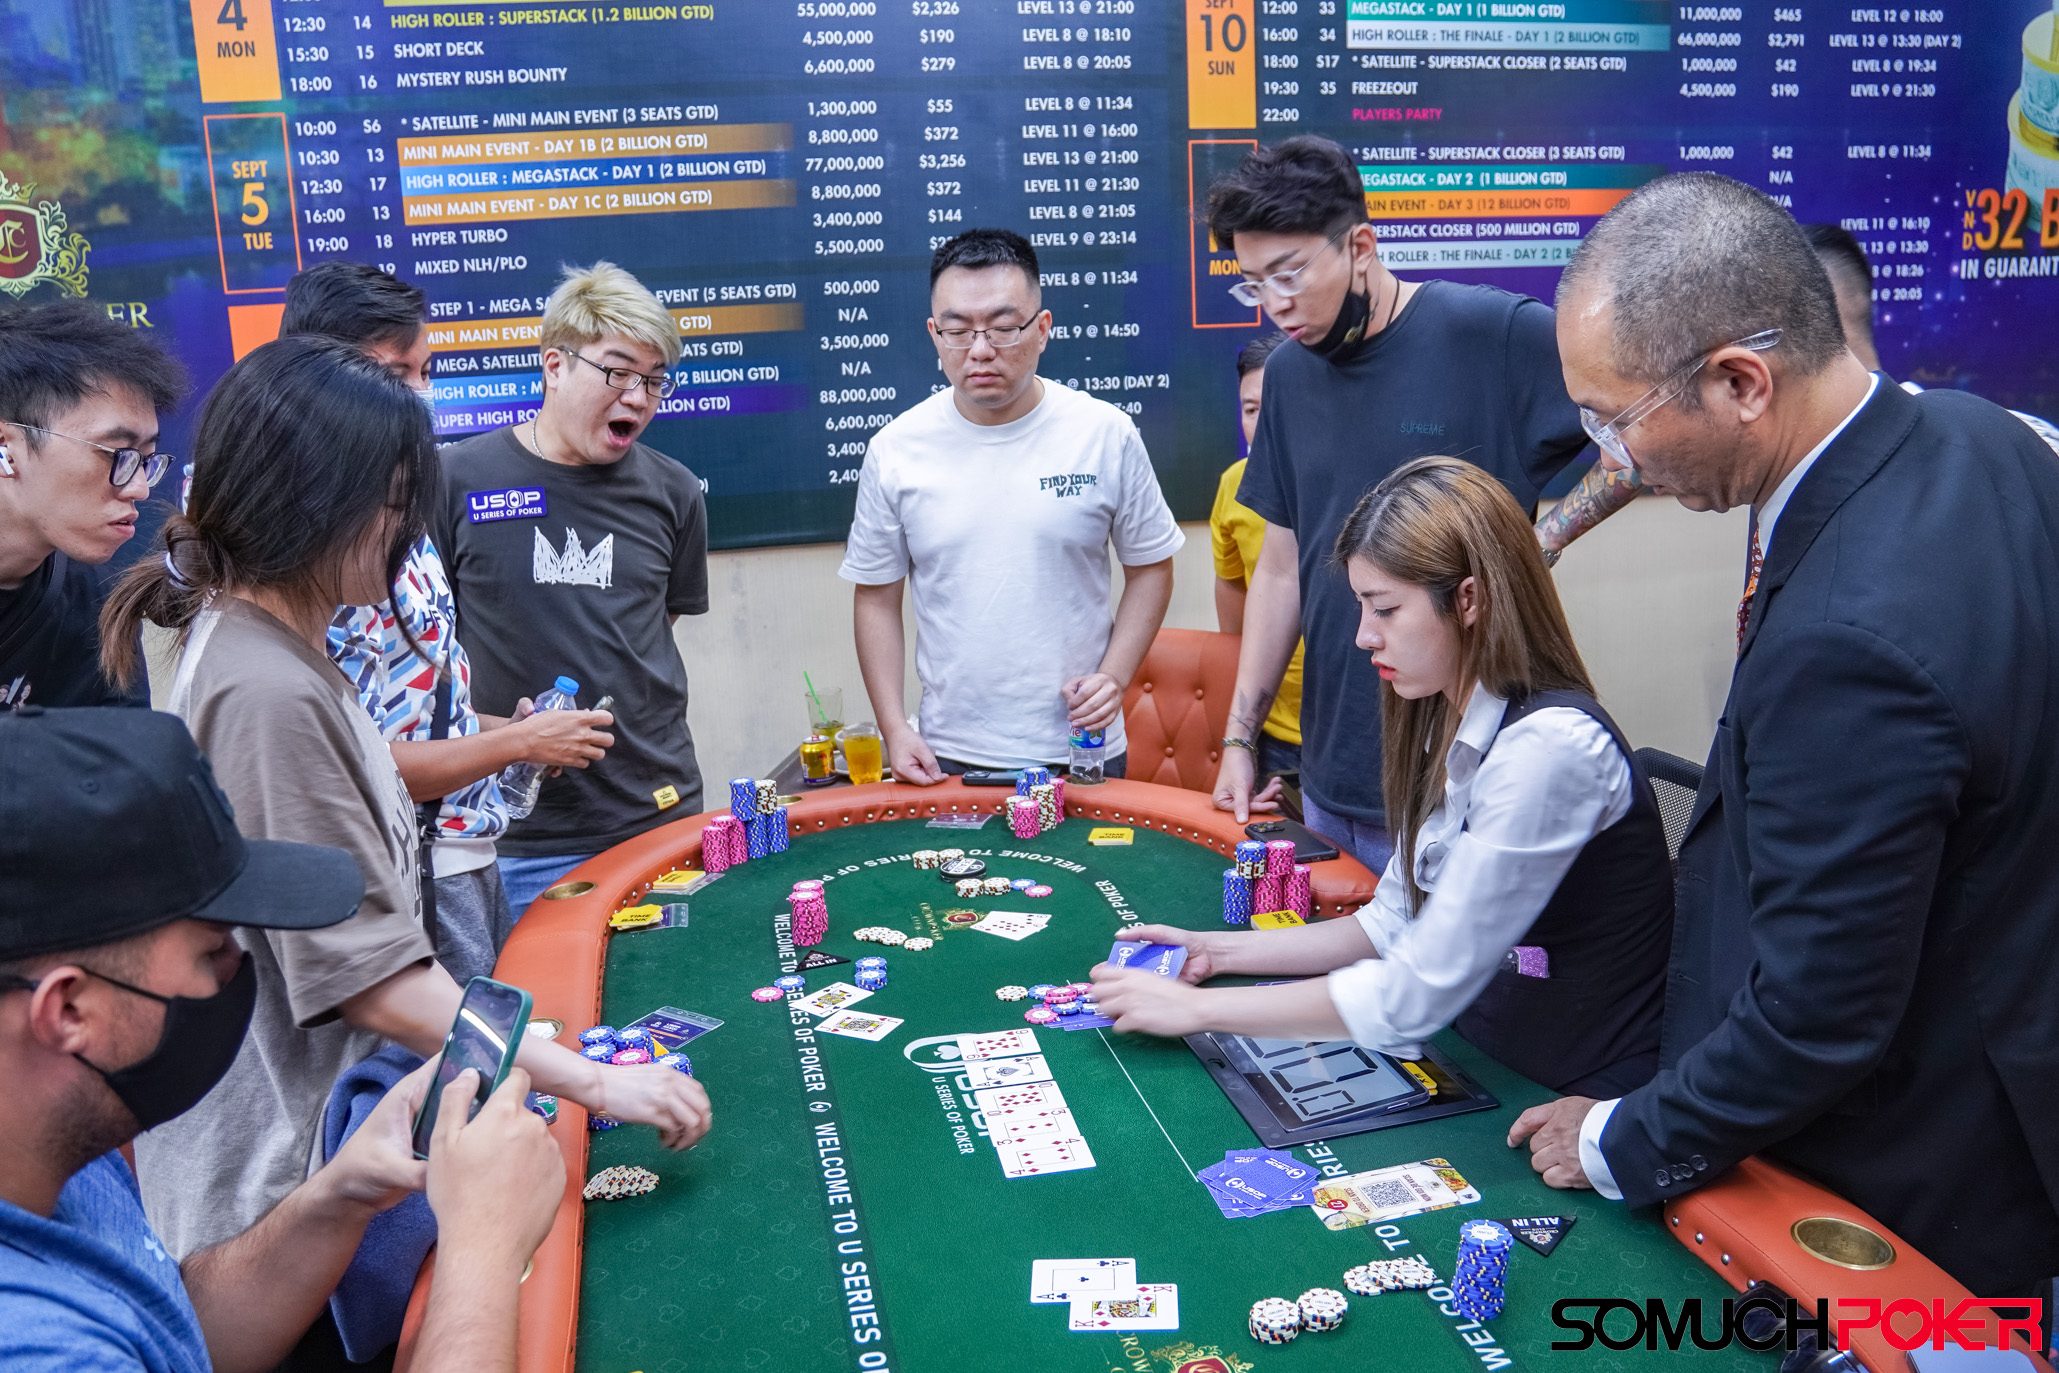 USOP Hanoi: Record breaking Main Event Day 2 ends with Yao Ren Hao leading final 18 players